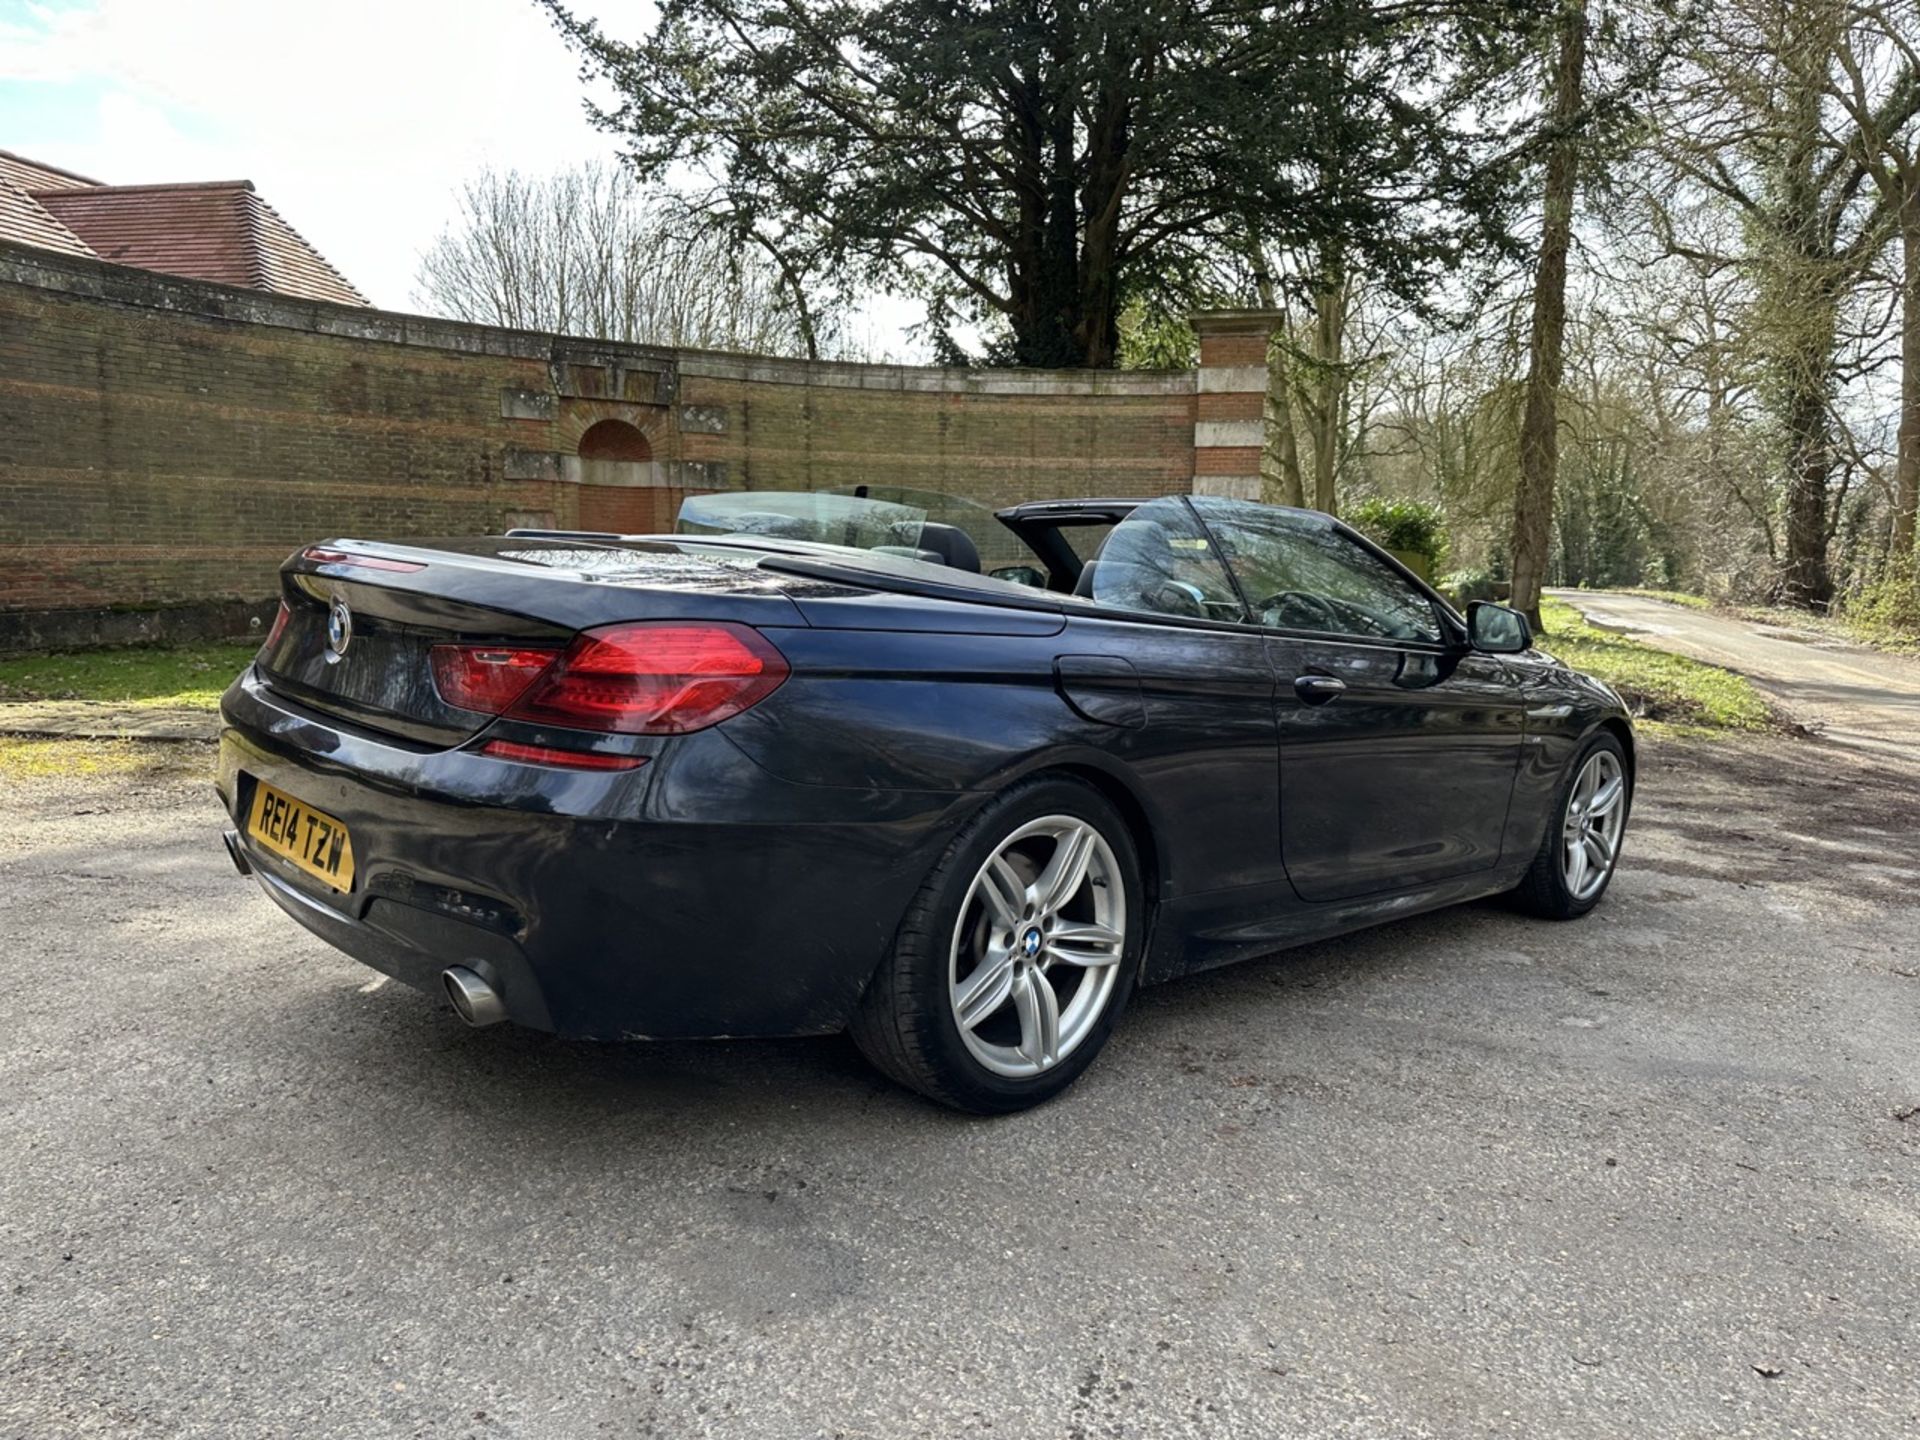 (RESERVE MET) BMW 6 SERIES 640d (M SPORT) Ultimate Summer Car - AUTOMATIC - Convertible - 2014 - Image 2 of 22